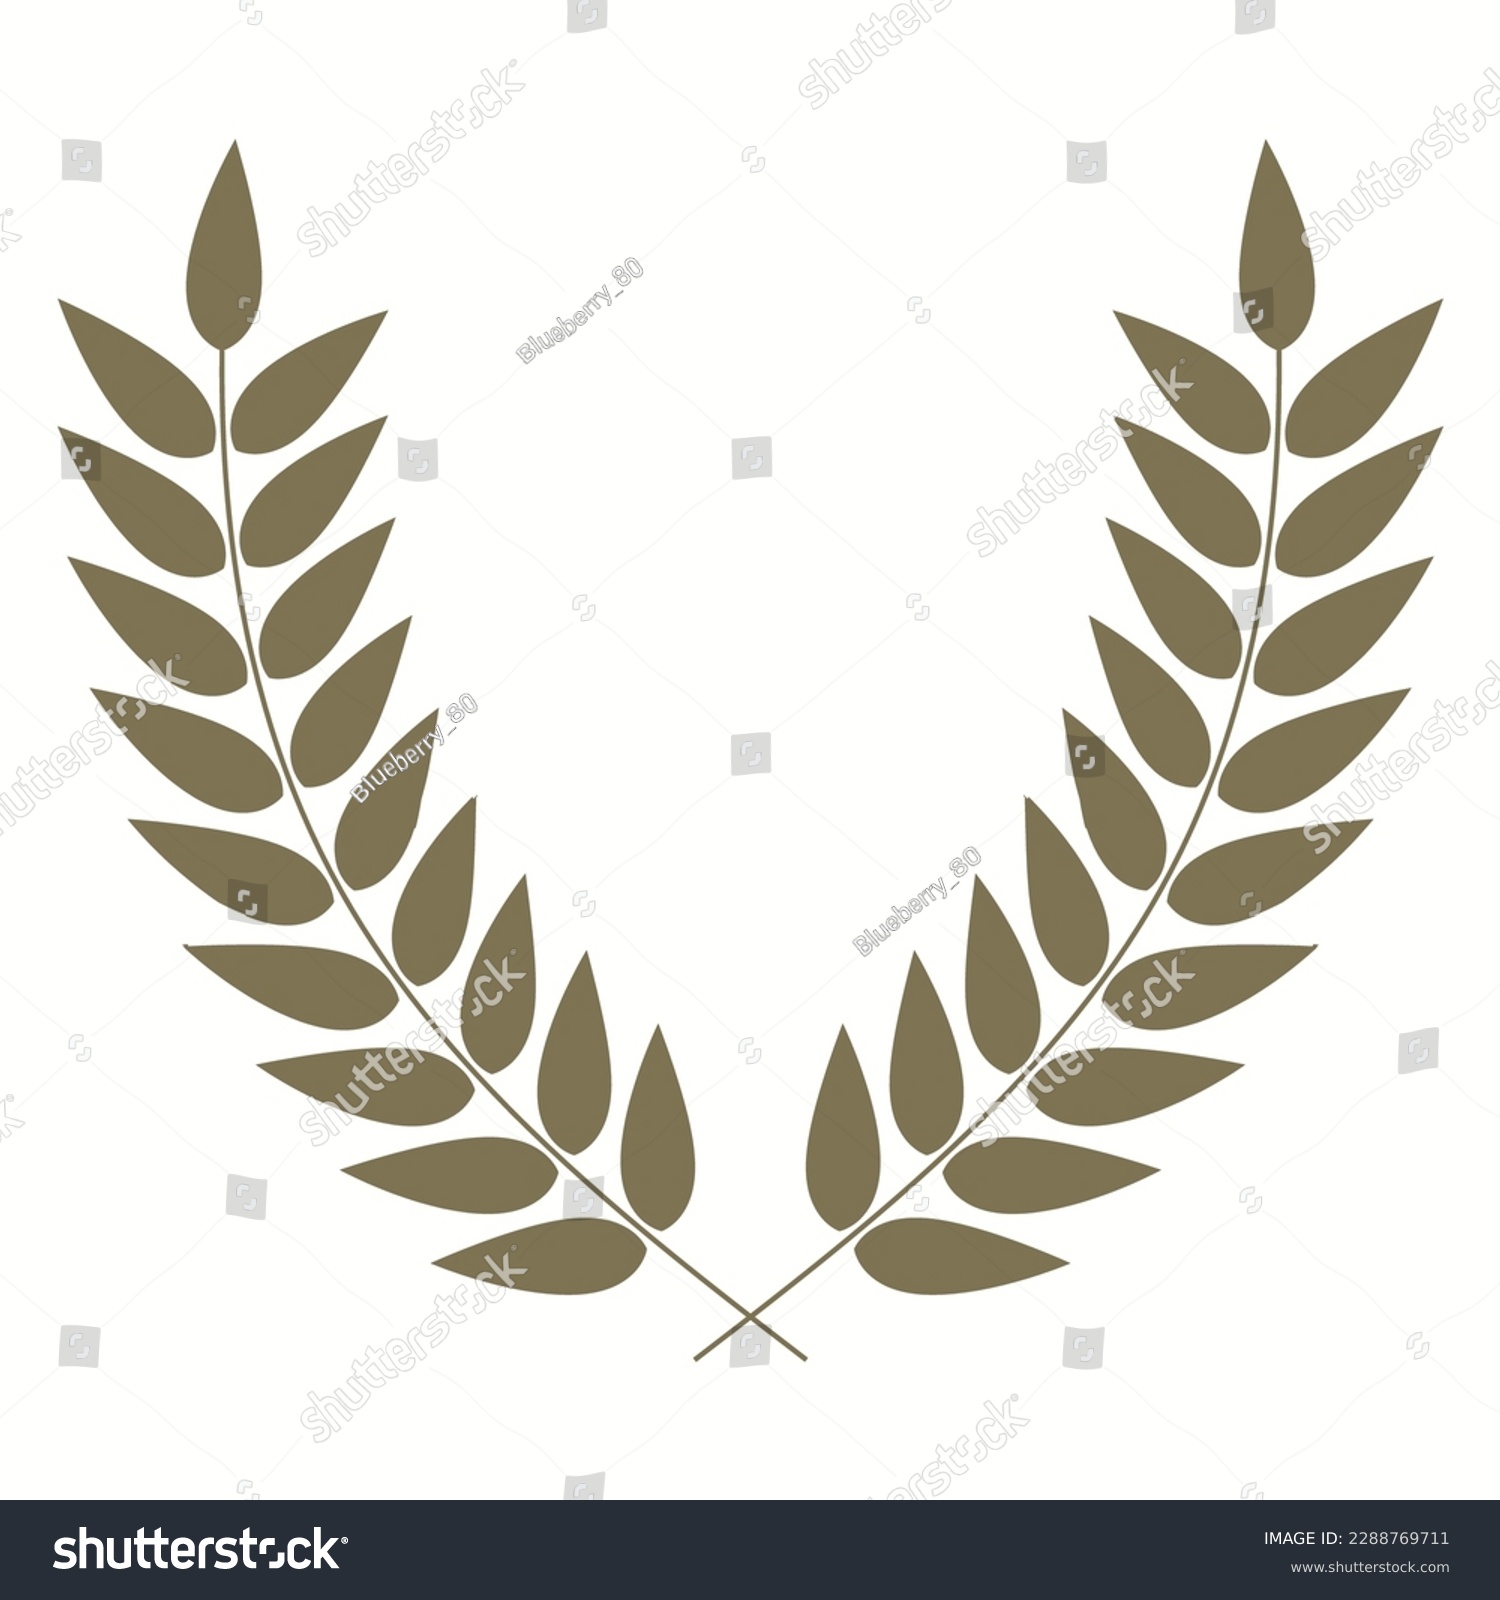 SVG of Award branches of bay leaves glyph icon vector illustration. Silhouette of Greek or Roman laurel wreath for honor winners prize, leaf frame for graduation certificate or sport victory medal award svg